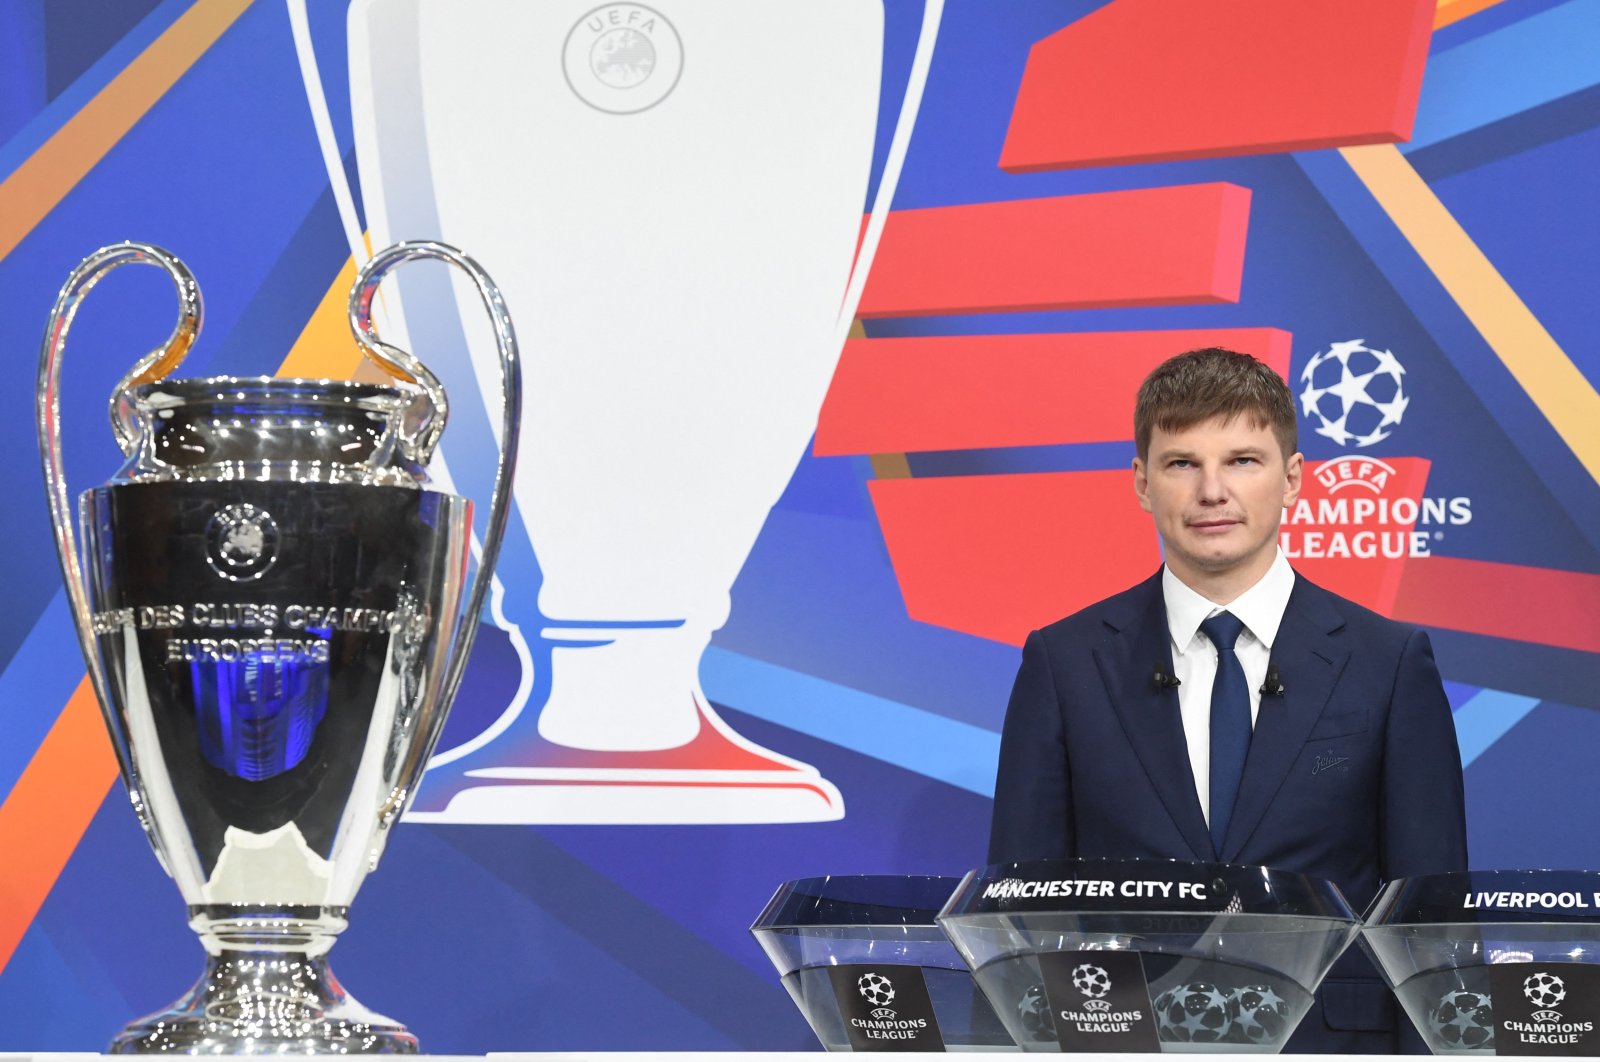 Former Russian forward Andrey Arshavin poses by the trophy during the Champions League Round of 16 draw at the UEFA headquarters in Nyon, Switzerland, Dec. 13, 2021. (AFP Photo)